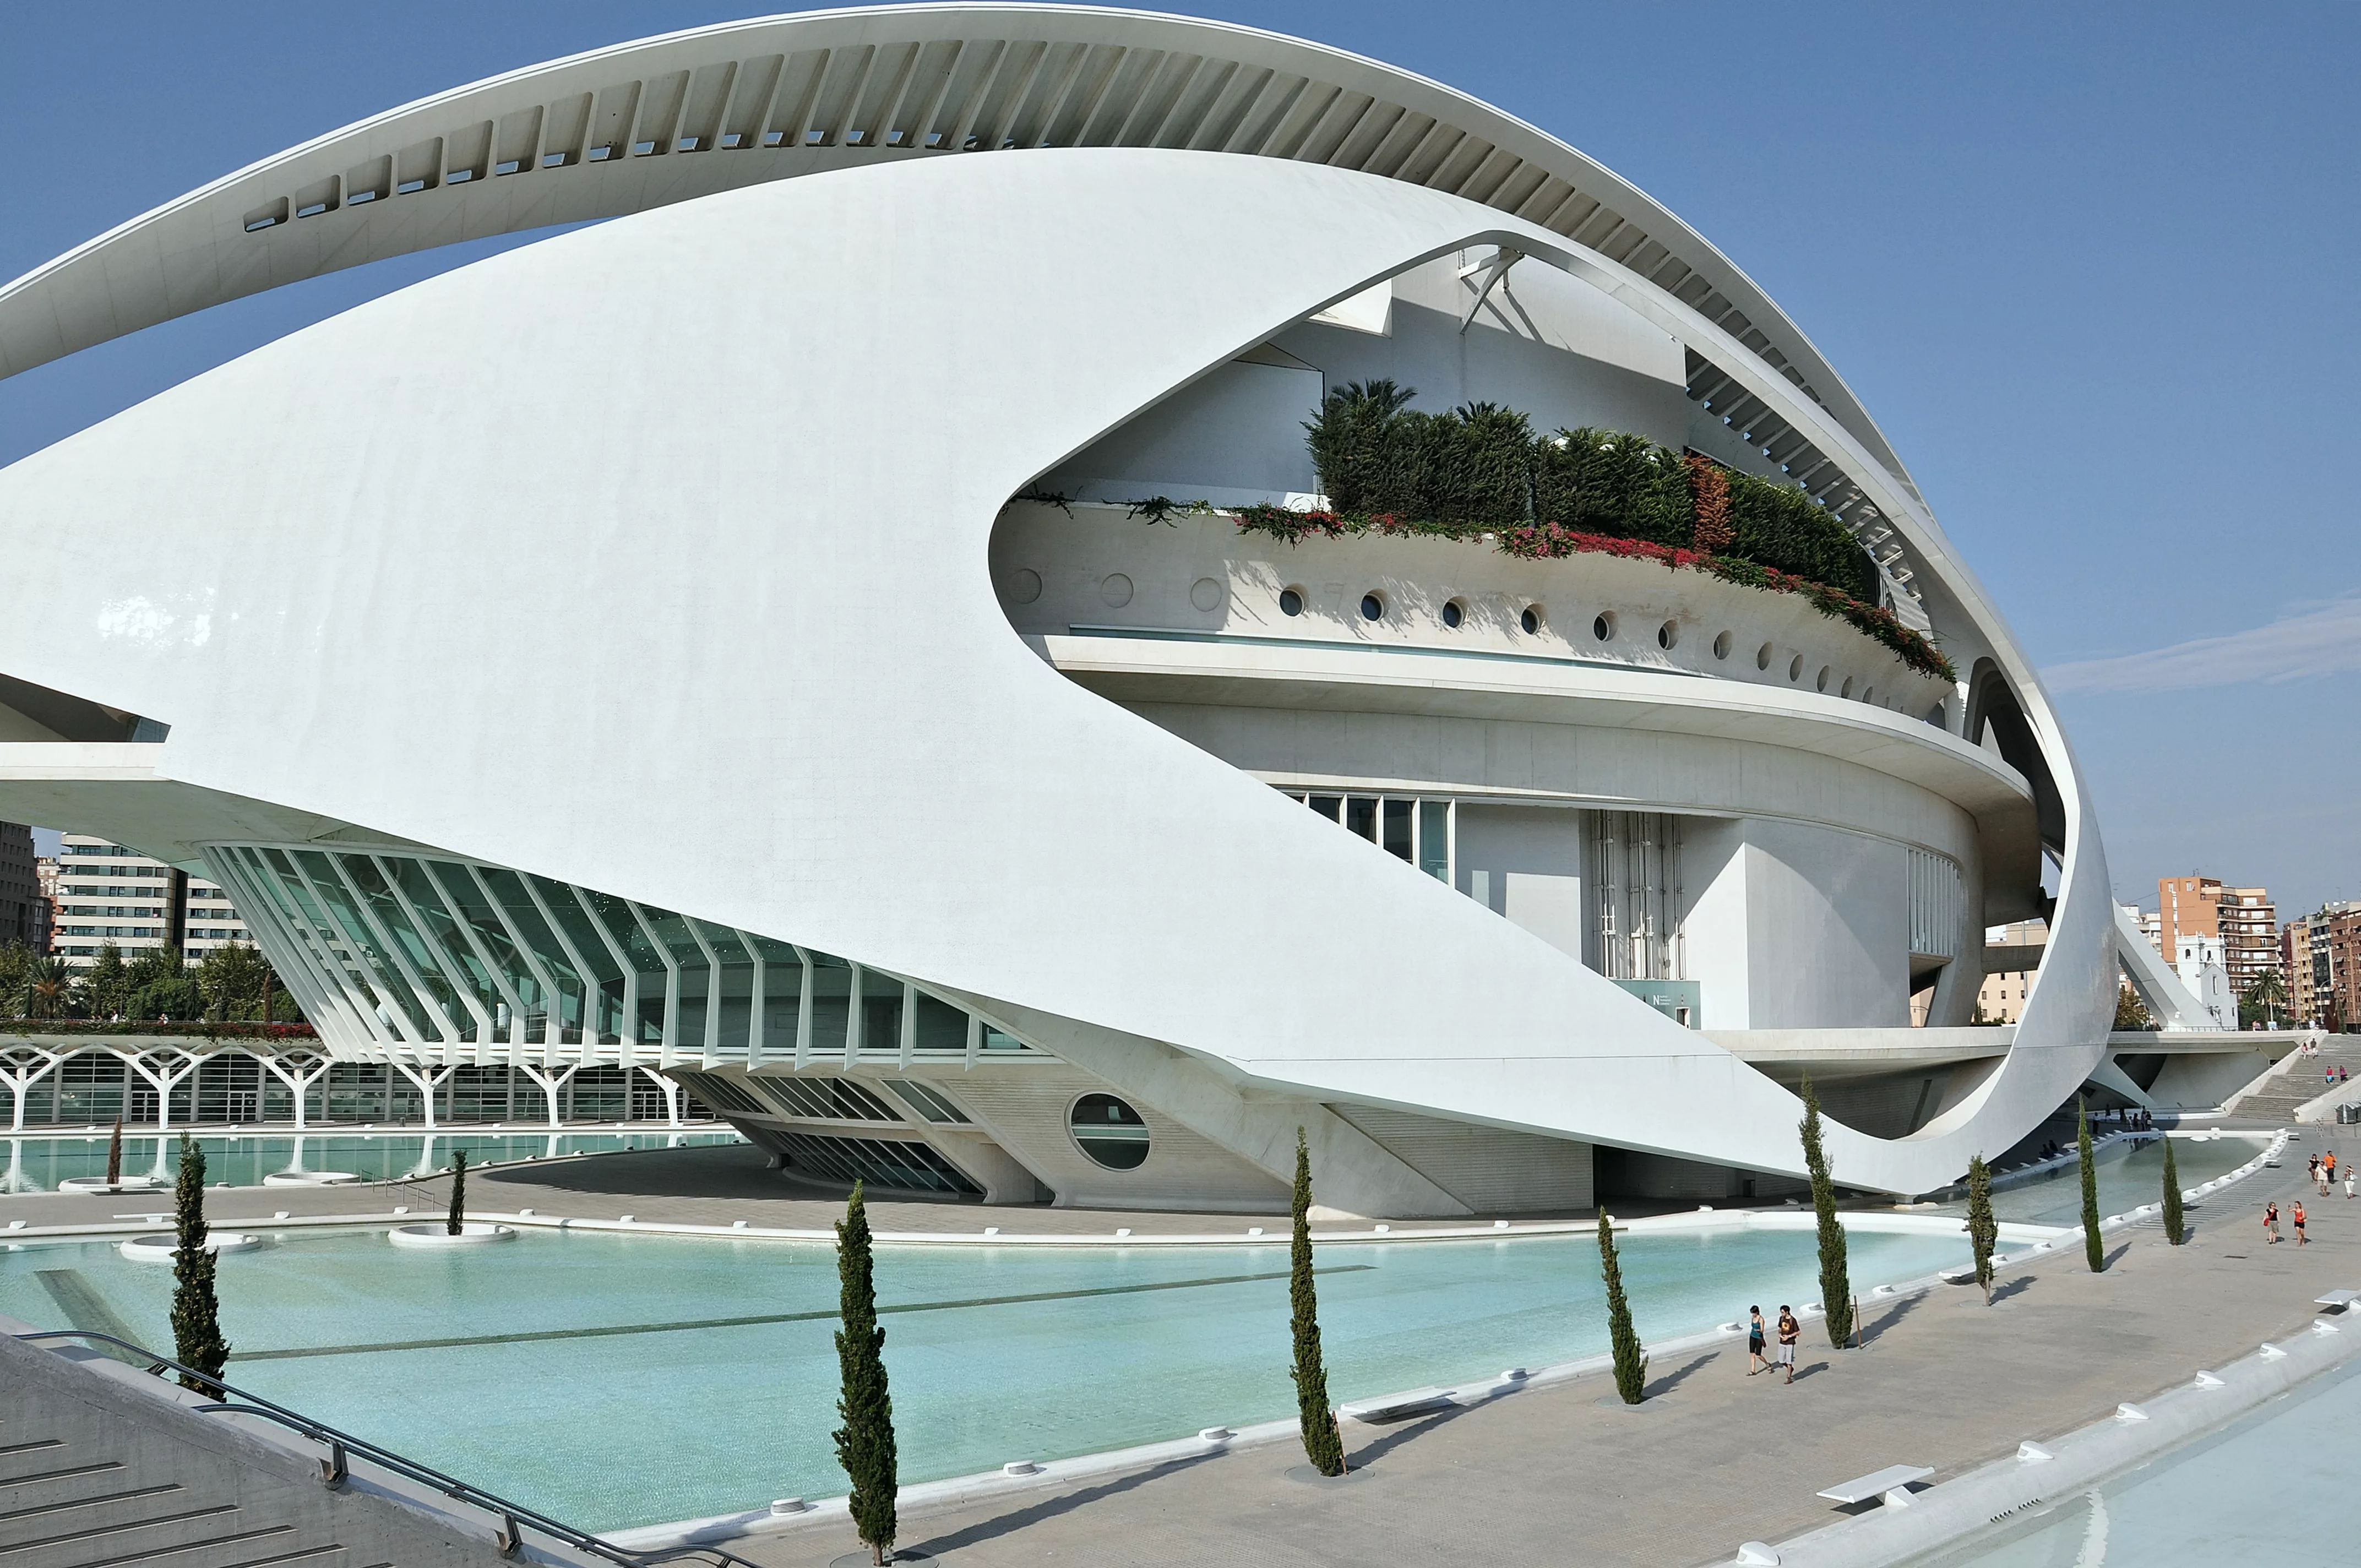 Reina Sofía Palace of the Arts in Spain, Europe | Architecture - Rated 3.8